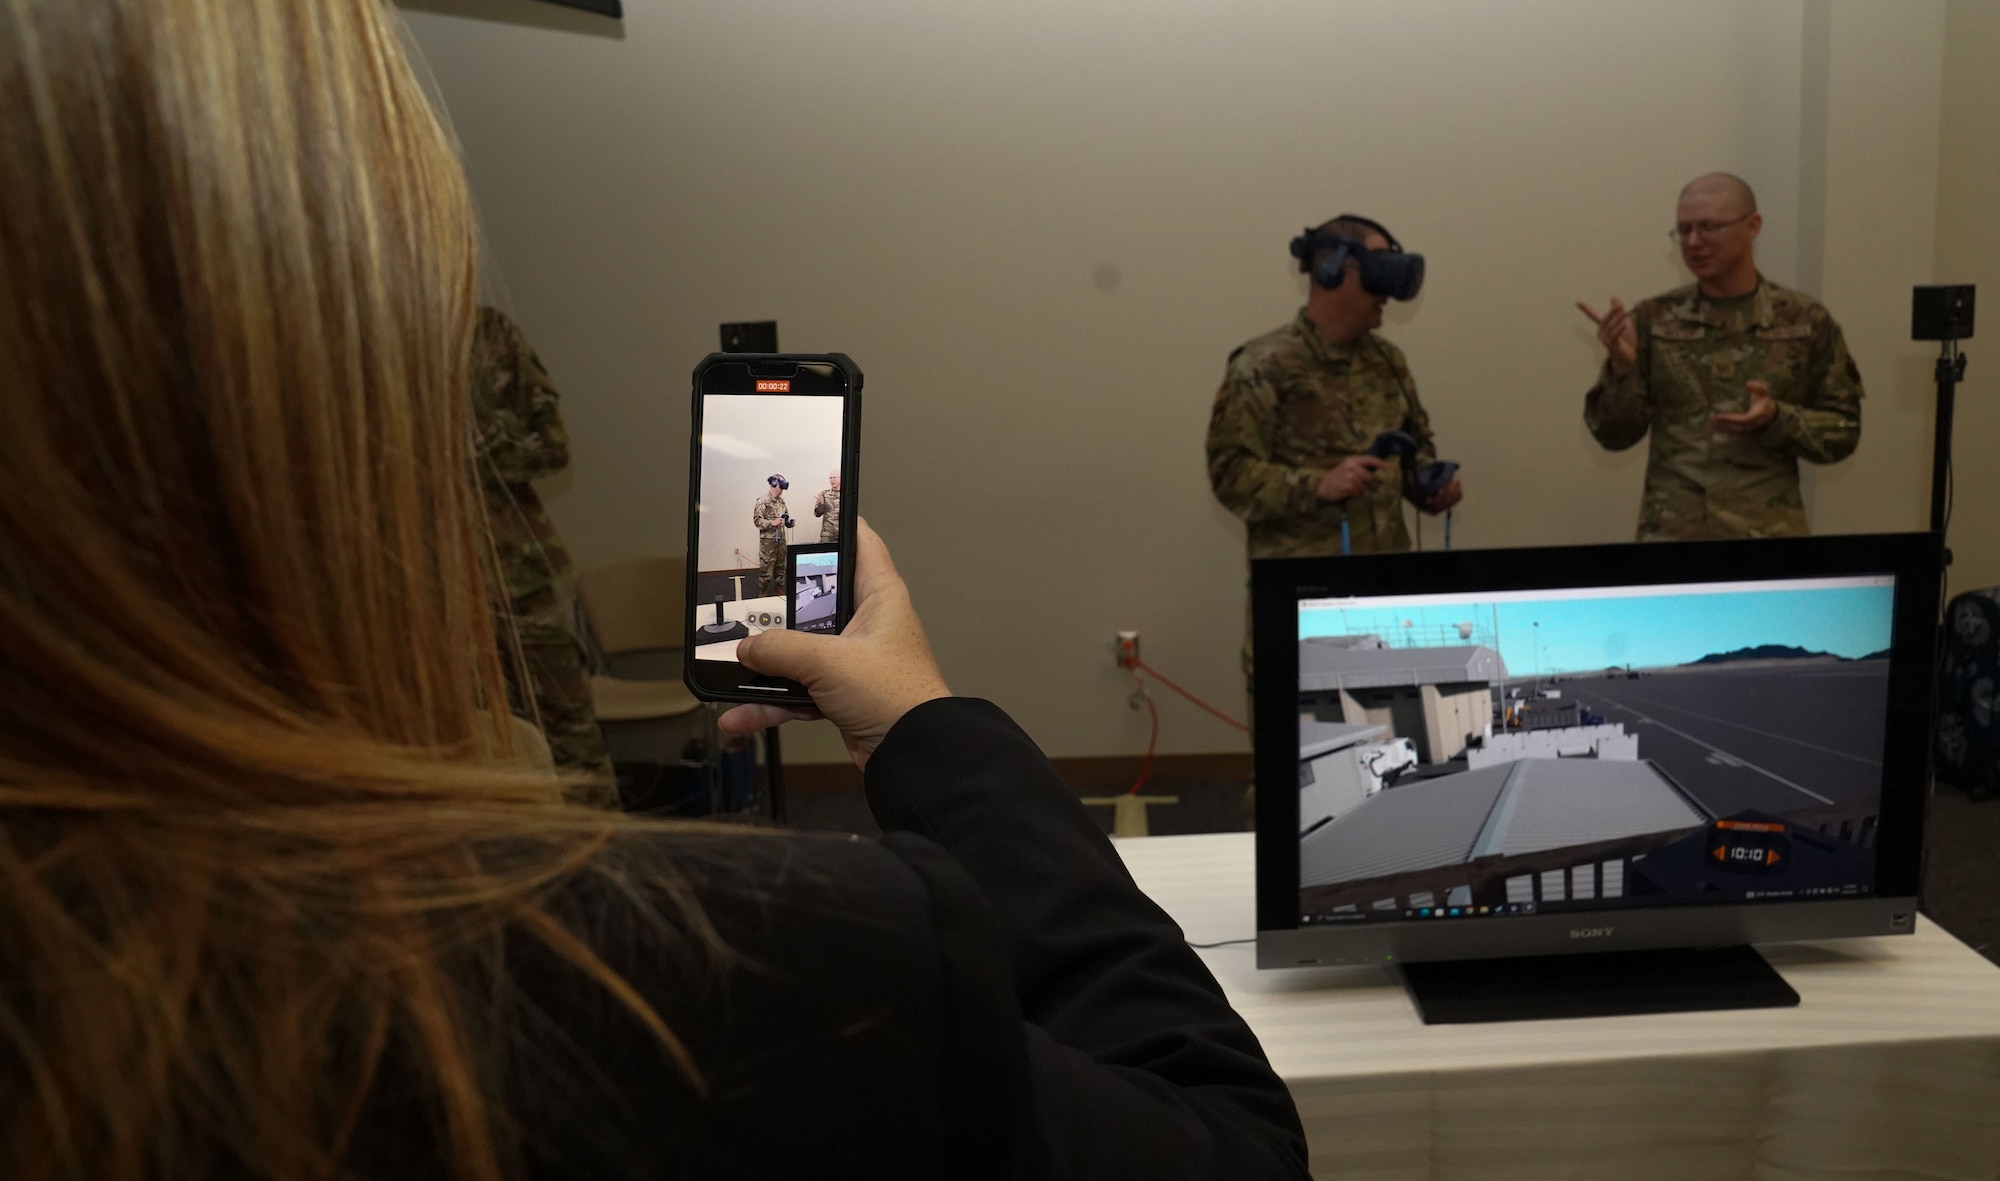 Sabrina Booker, Second Air Force training pathway manager, films a virtual reality demonstration at the Technical Training 101 Tech Expo at Keesler Air Force Base, Mississippi, March 30, 2023.